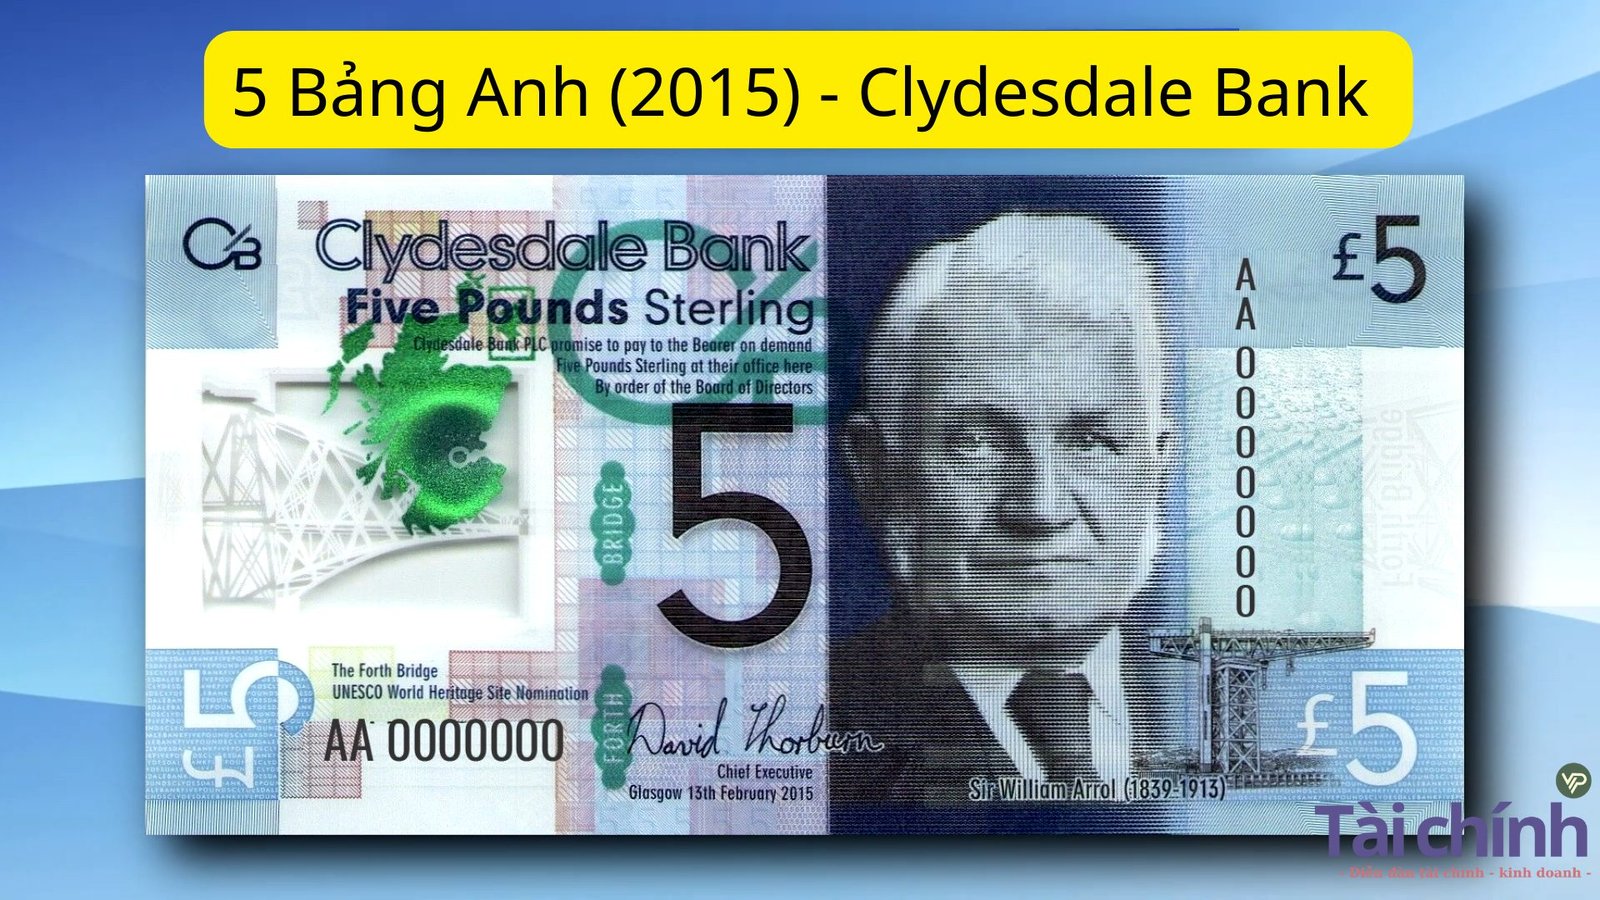 5 Bảng Anh (2015) - Clydesdale Bank